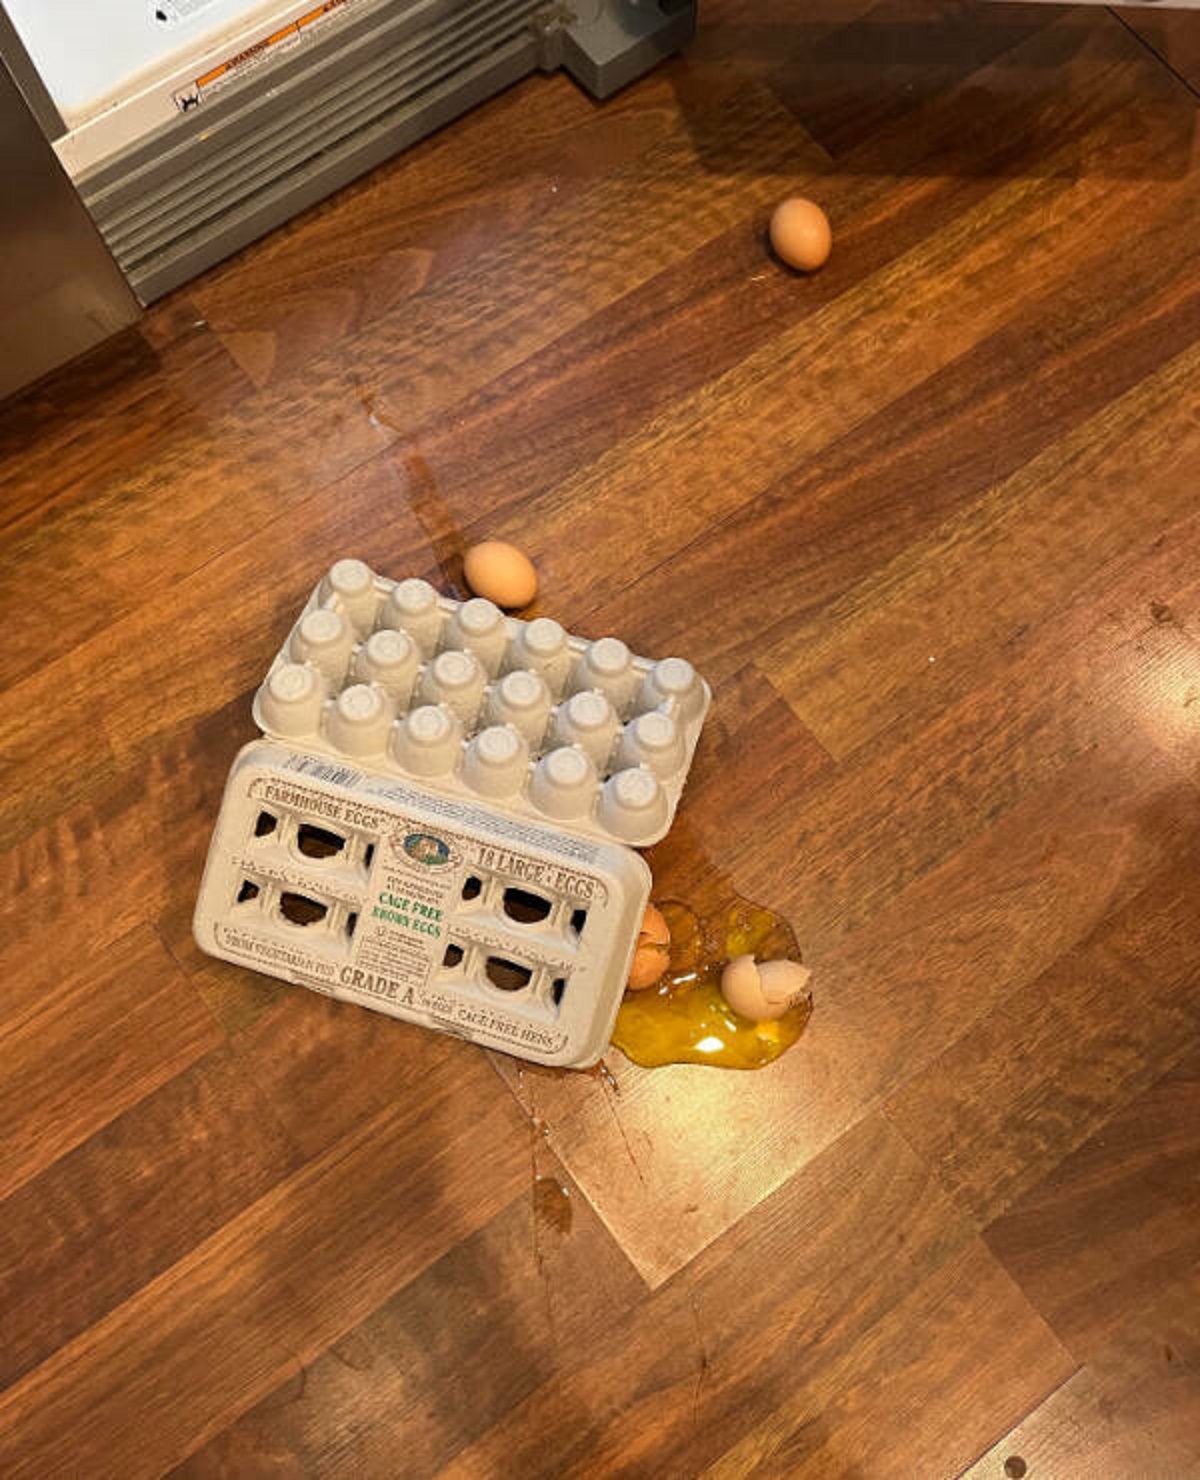 “Asked my 8 year old to put the eggs back in the fridge after breakfast this morning .”